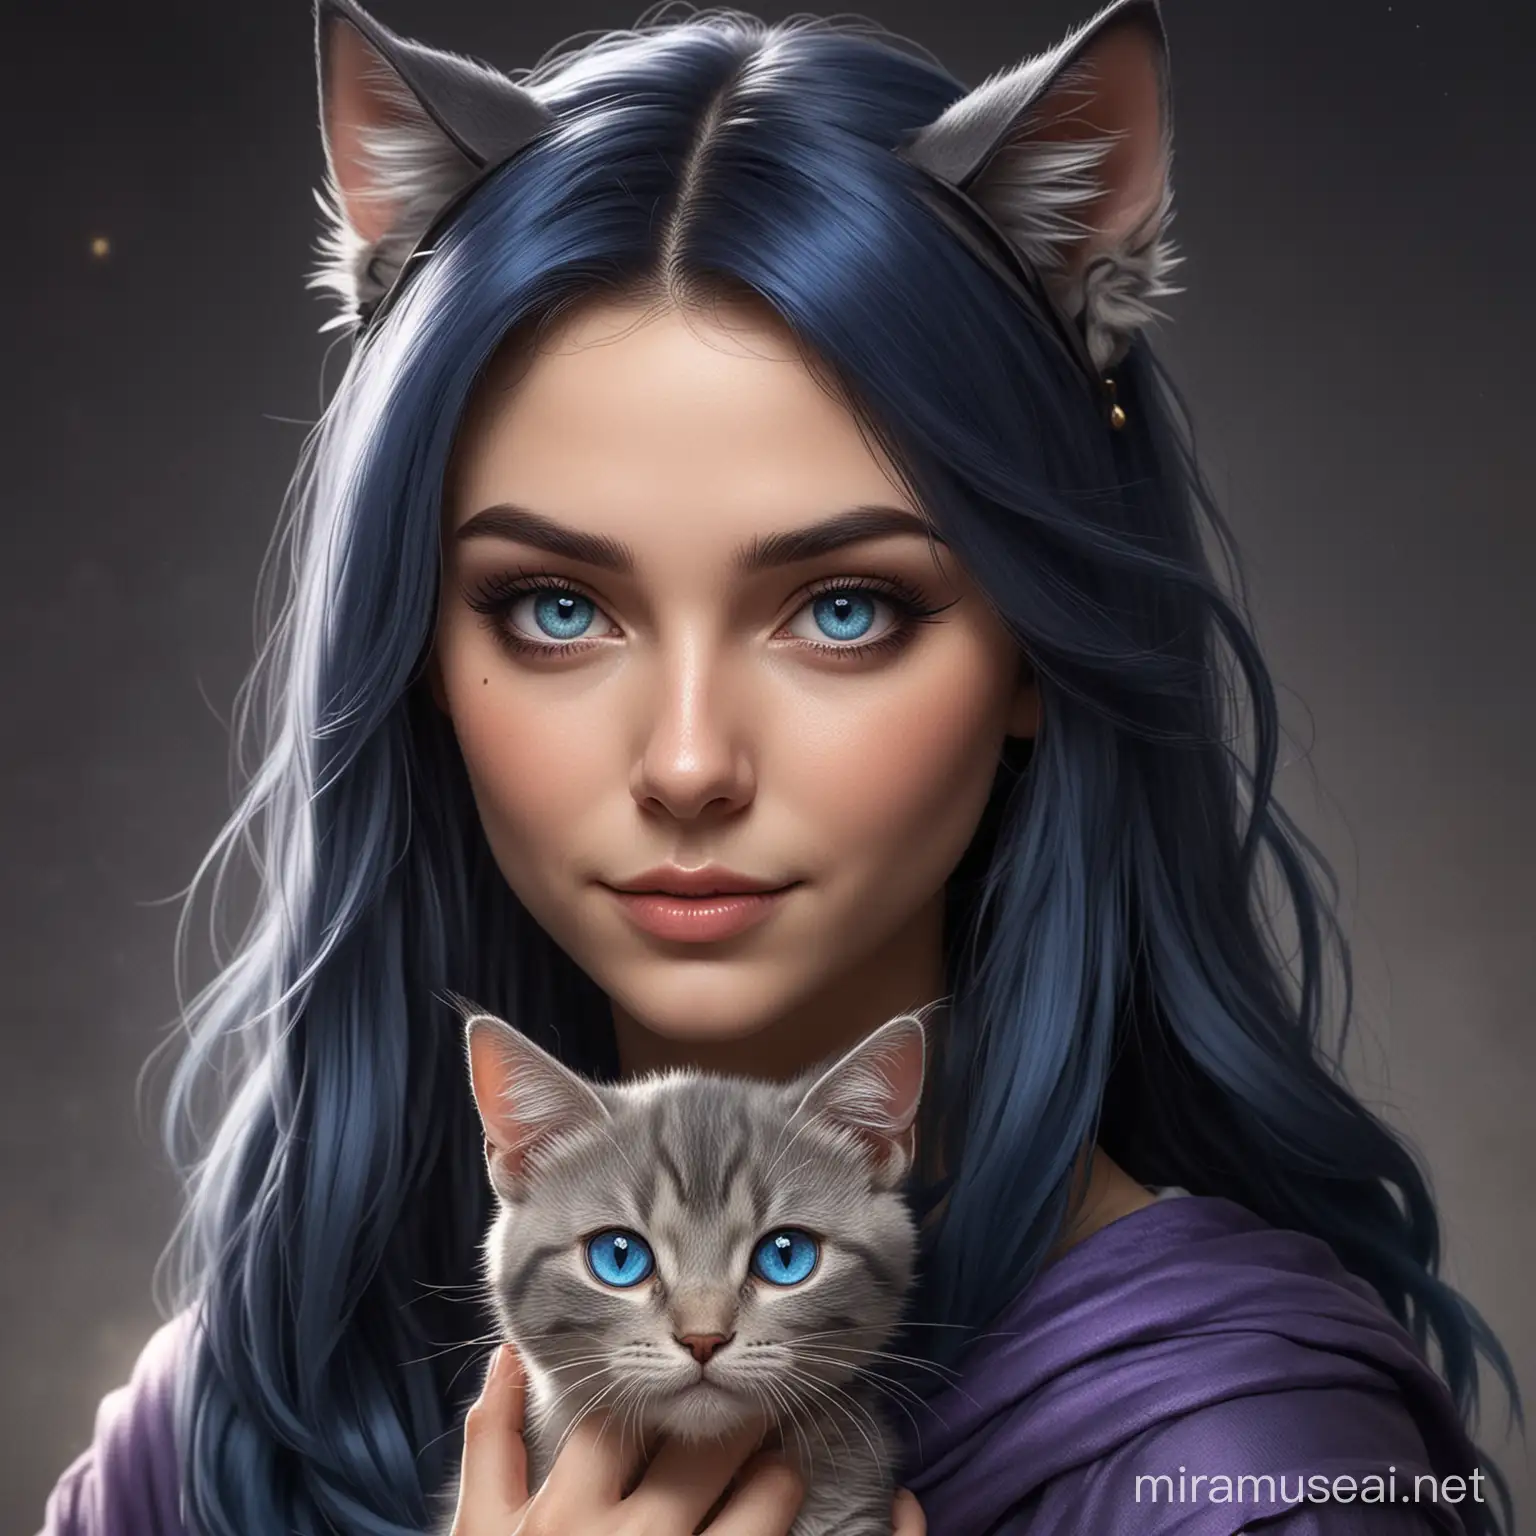 A Caucasian female wizard with blue eyes and dark blue hair and small cat ears and her tabby cat familiar